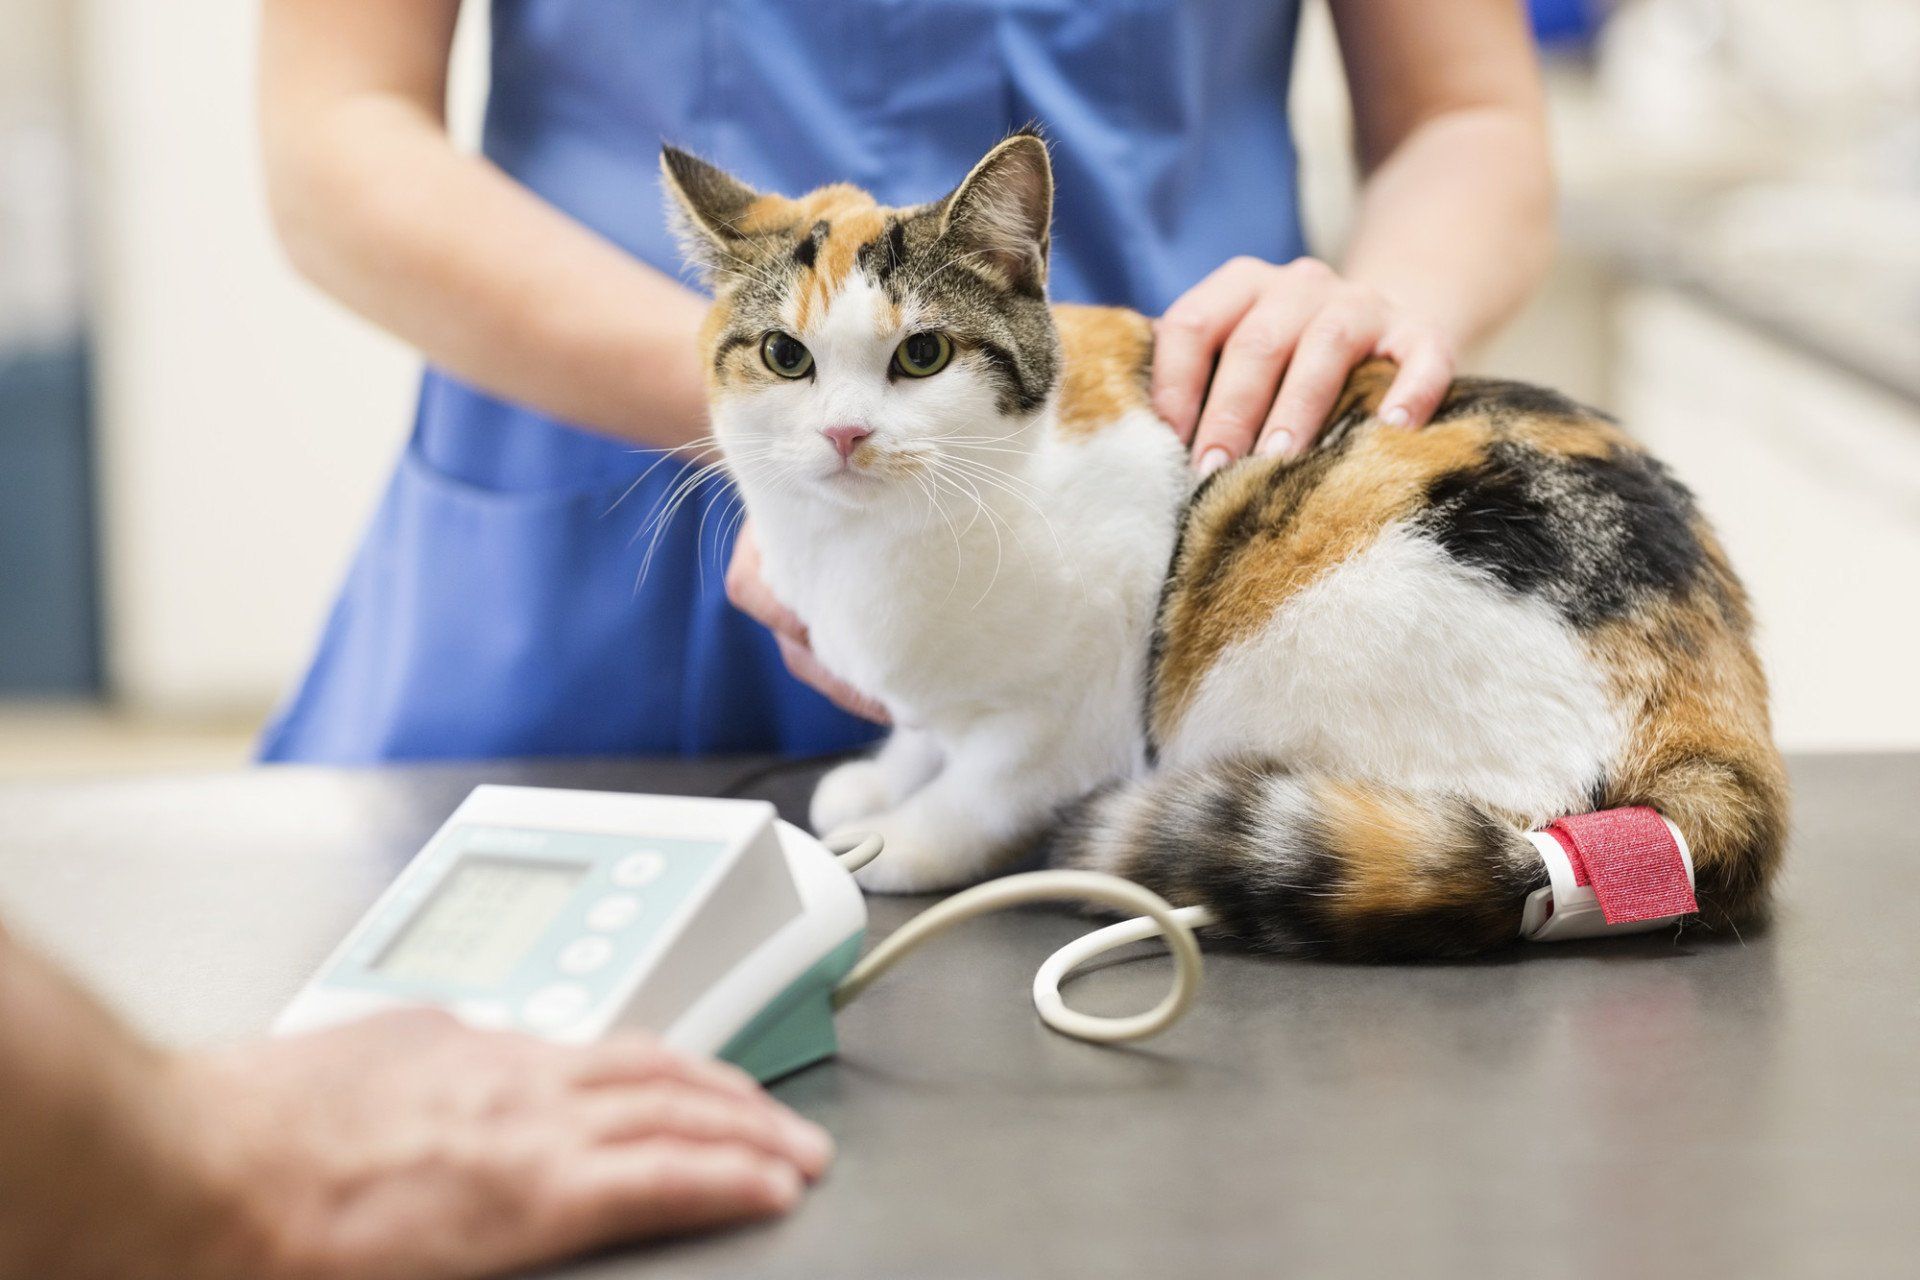 blood pressure check carried out for a cat